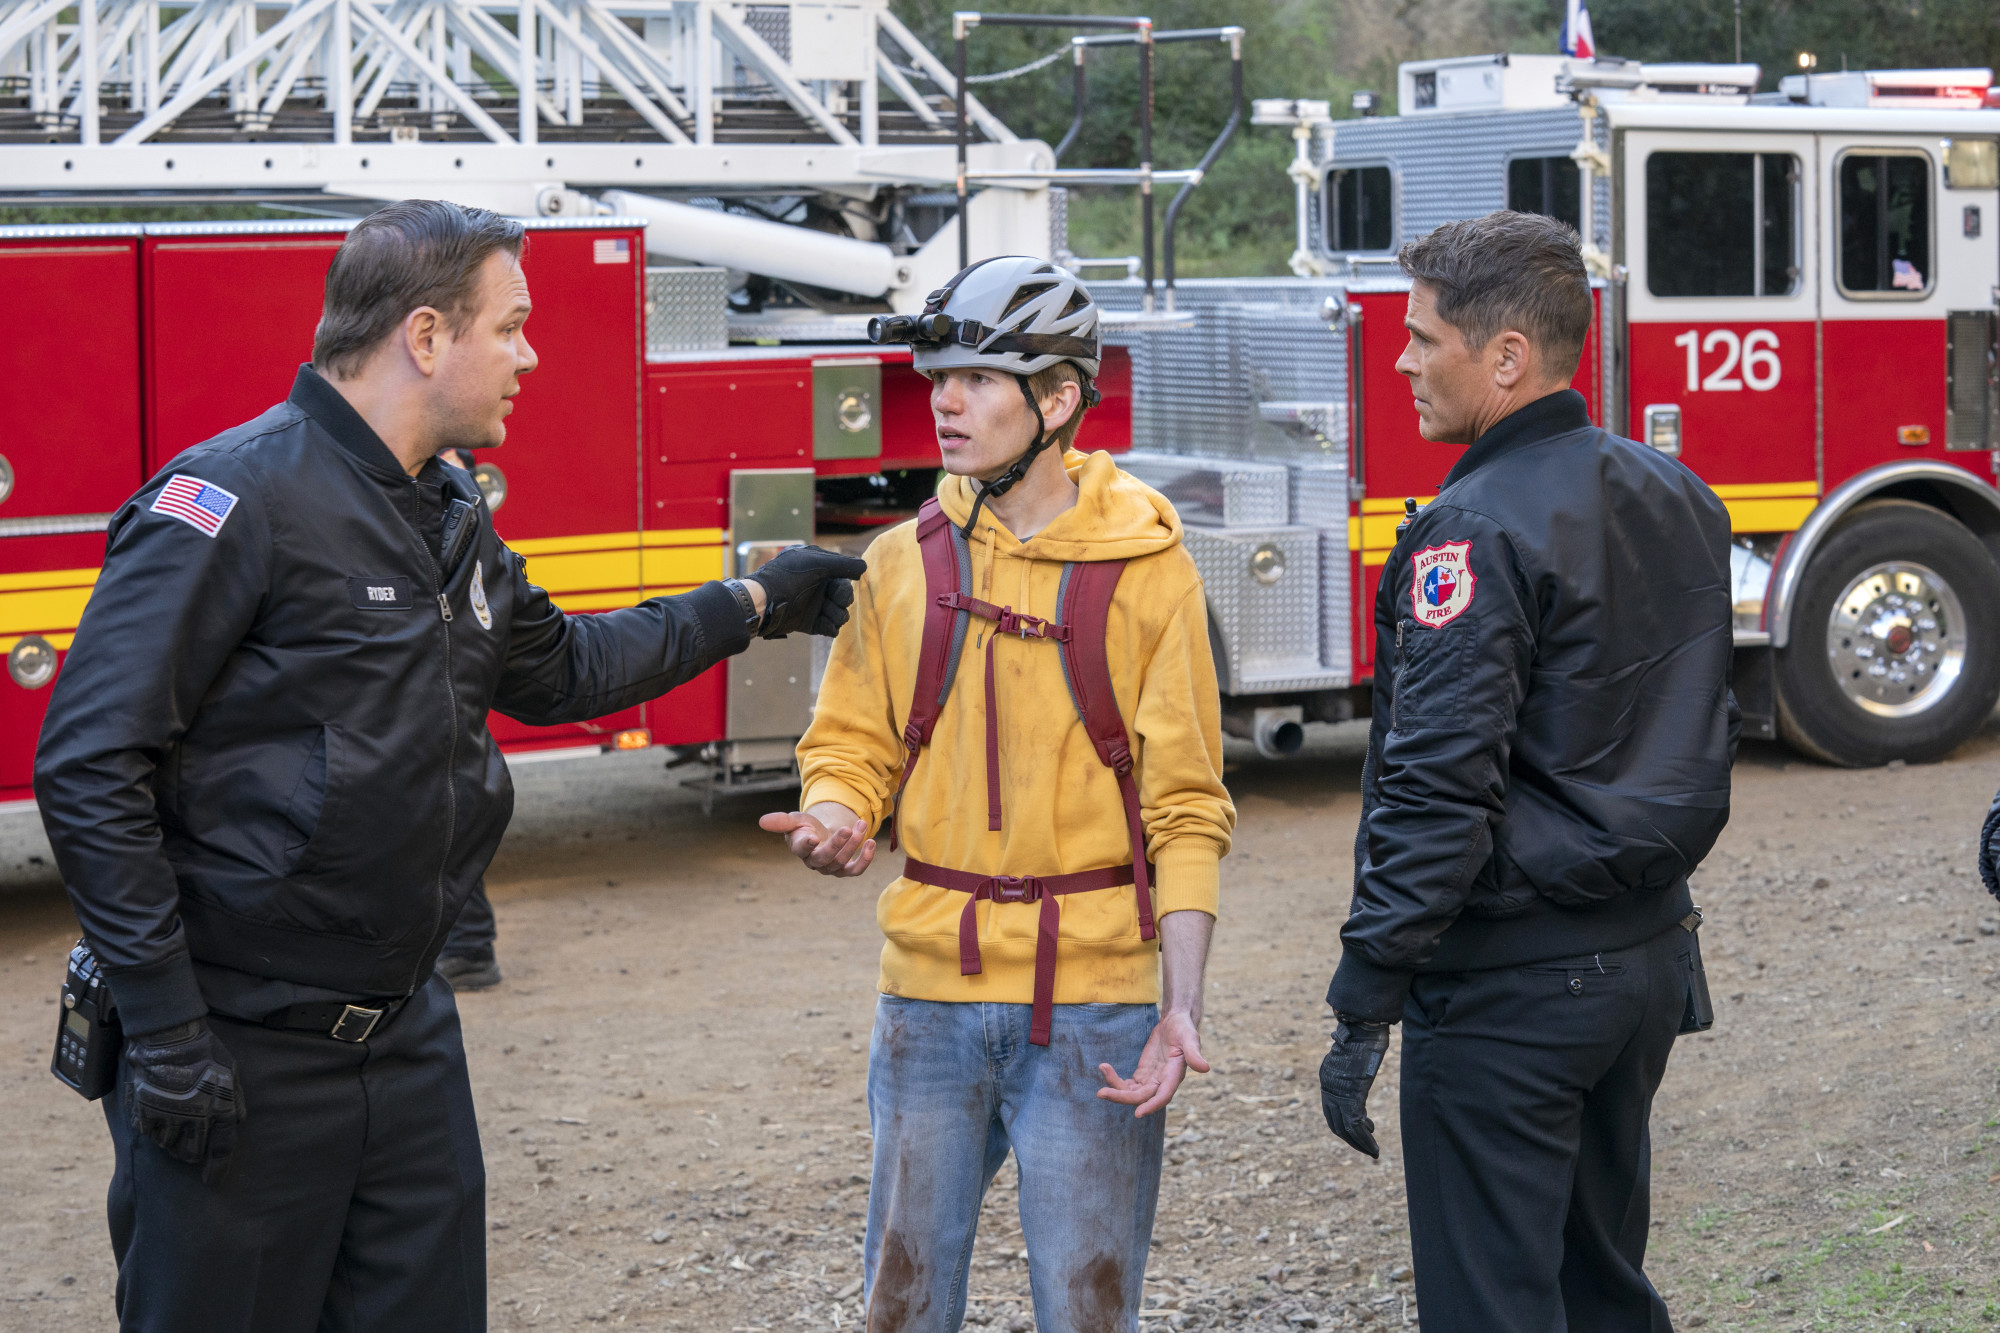 9-1-1: LONE STAR: L-R: Jim Parrack, guest star Will Spencer and Rob Lowe in "Awakening/Austin, We Have A Problem" two-hour season finale of 9-1-1: LONE STAR airing Monday, March 9 (8:00-10:00 PM ET/PT) on FOX. ©2020 Fox Media LLC. CR: Jack Zeman/FOX.